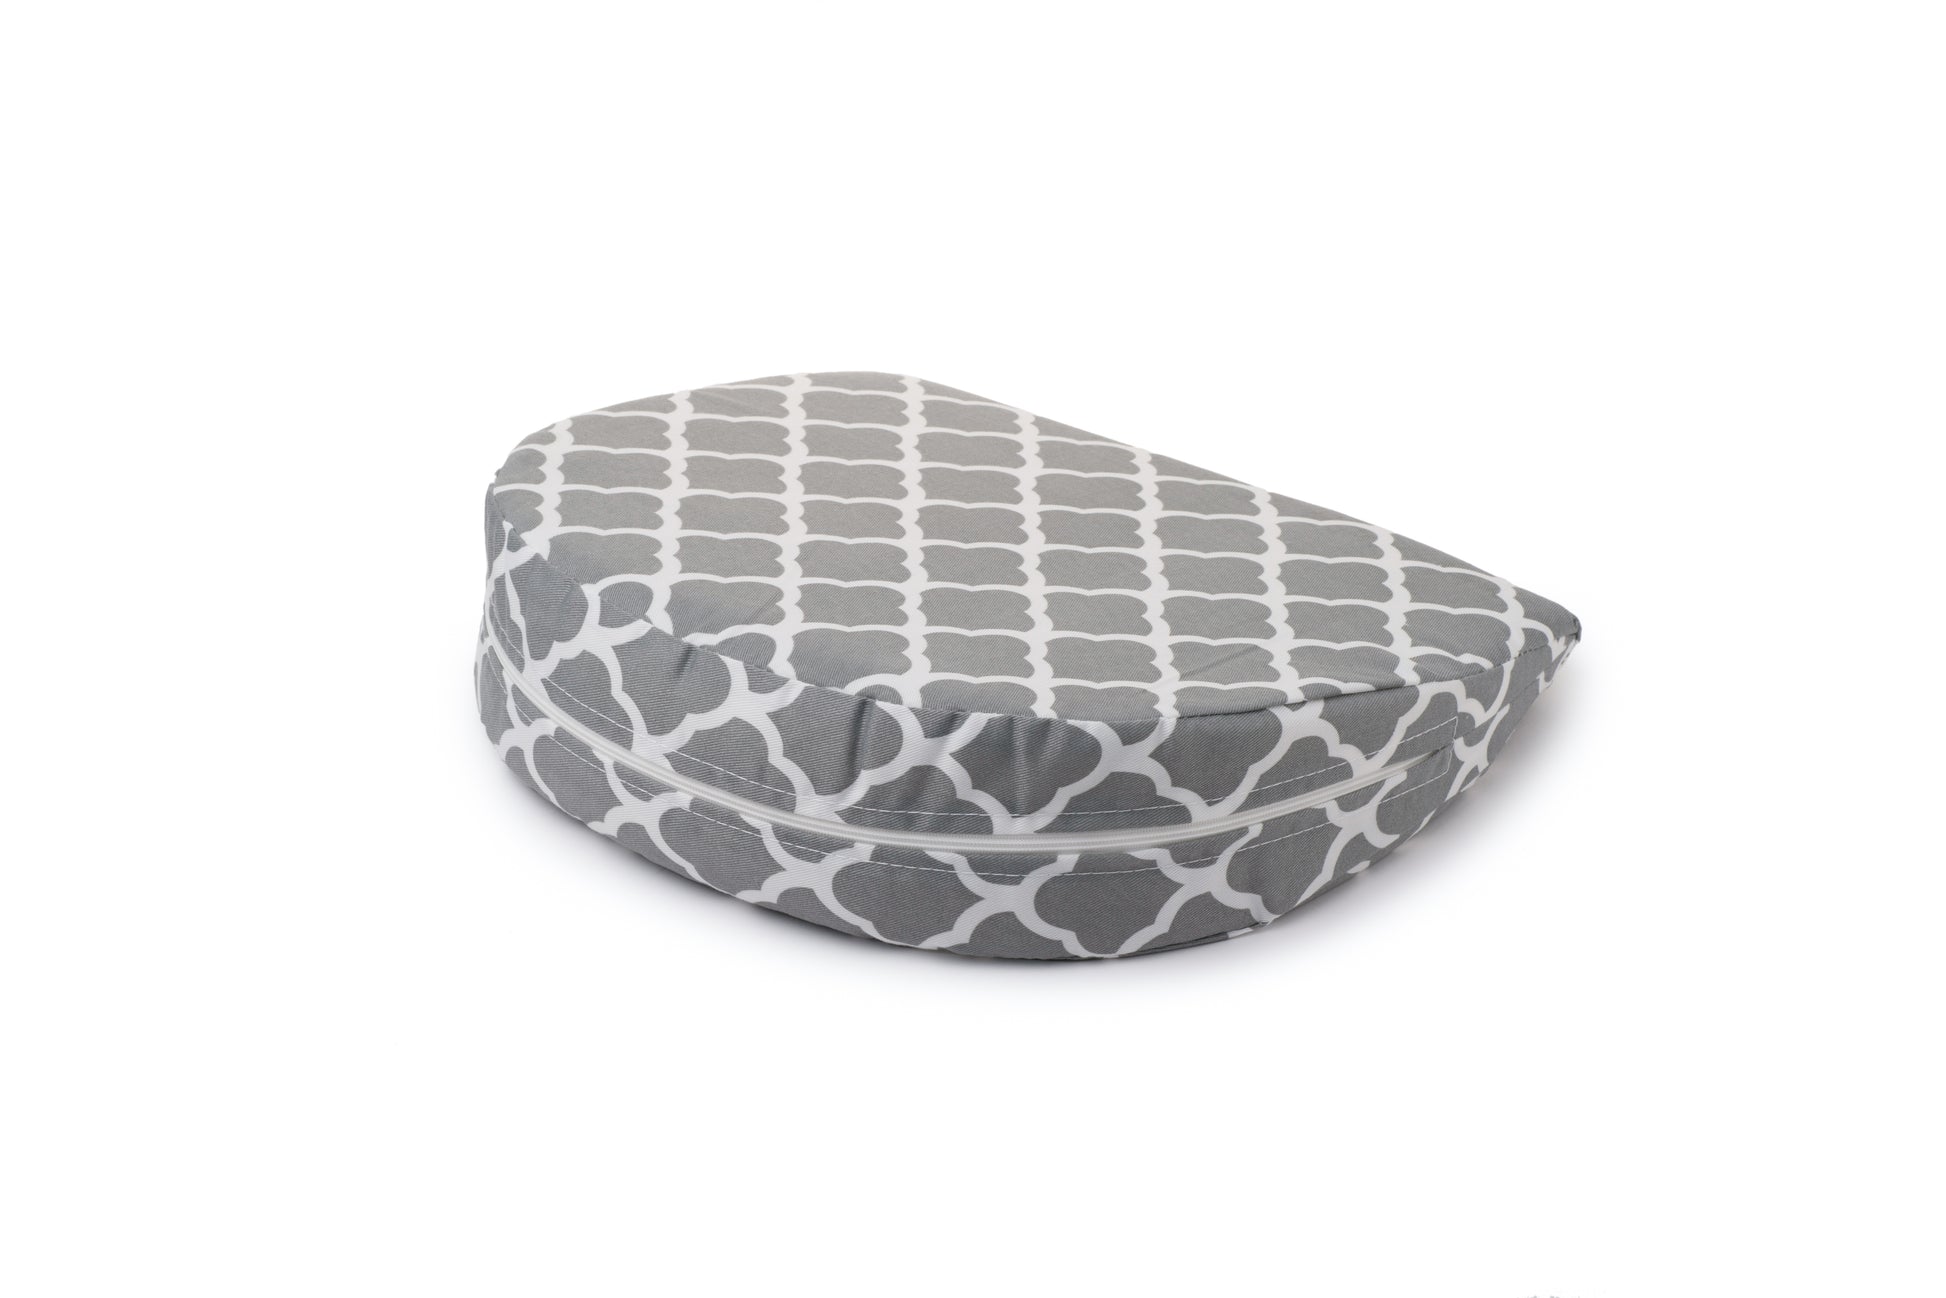 Importikaah-Pregnancy-Wedge-Pillow-comfort-a-dreamy-embrace